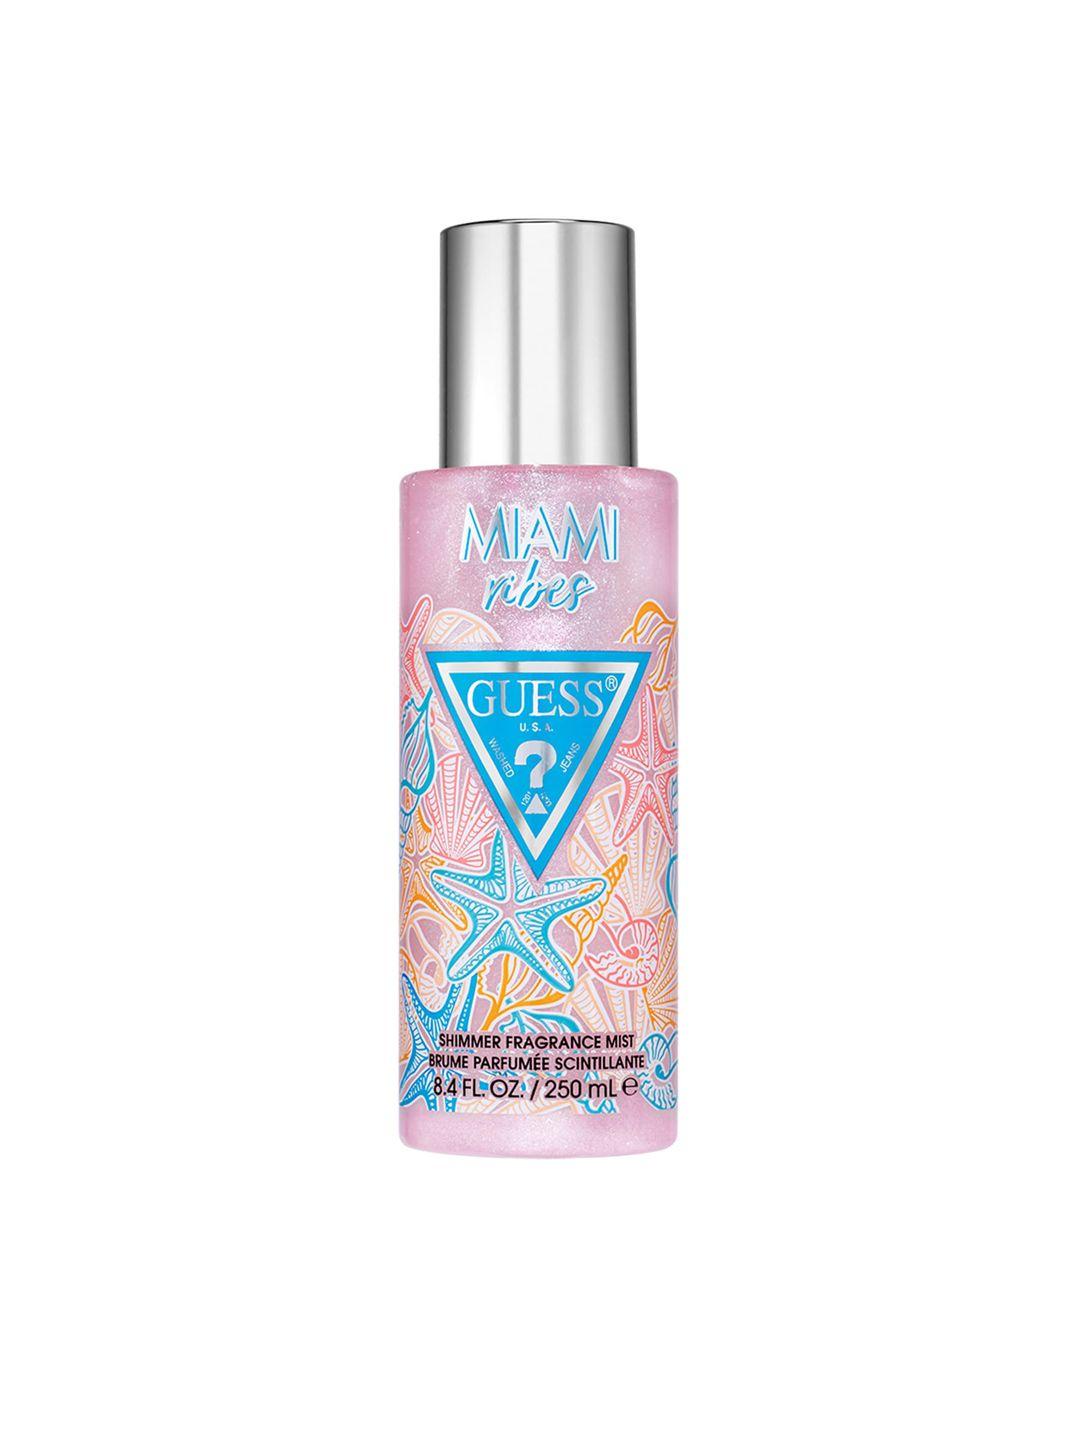 guess destination miami vibes shimmer fragrance body mist 250ml